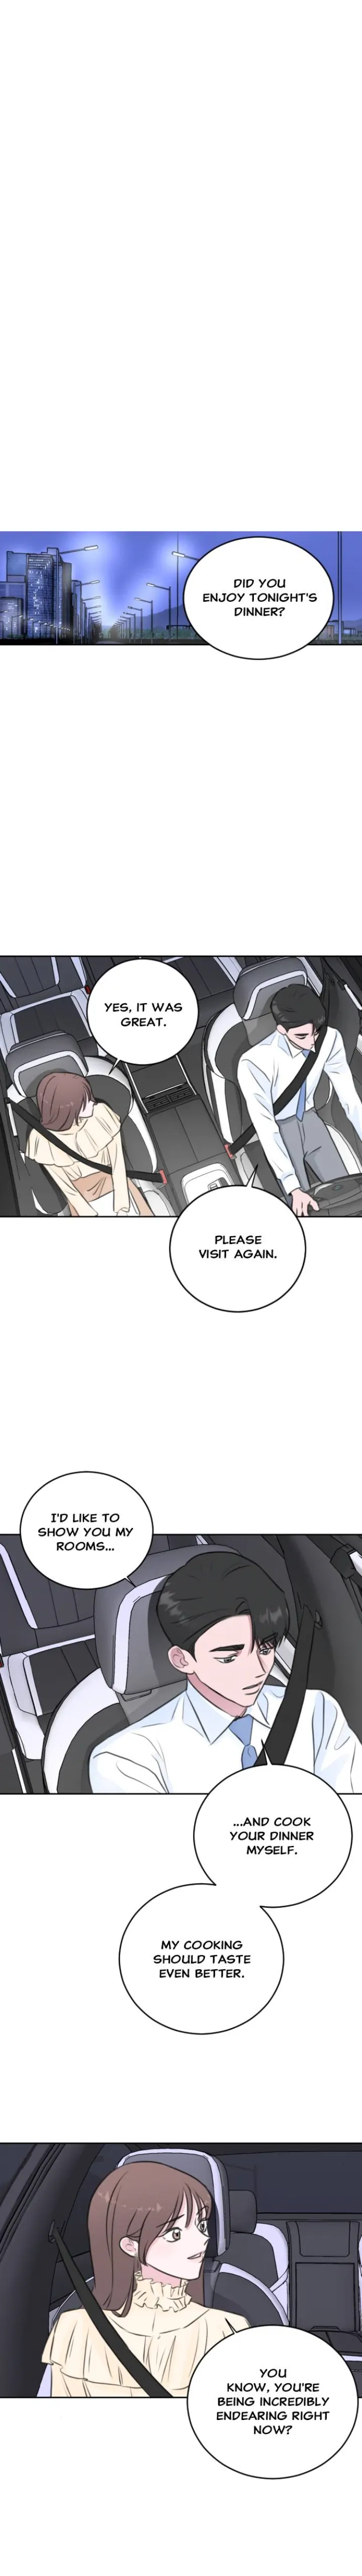 Office Marriage, After a Breakup chapter 29